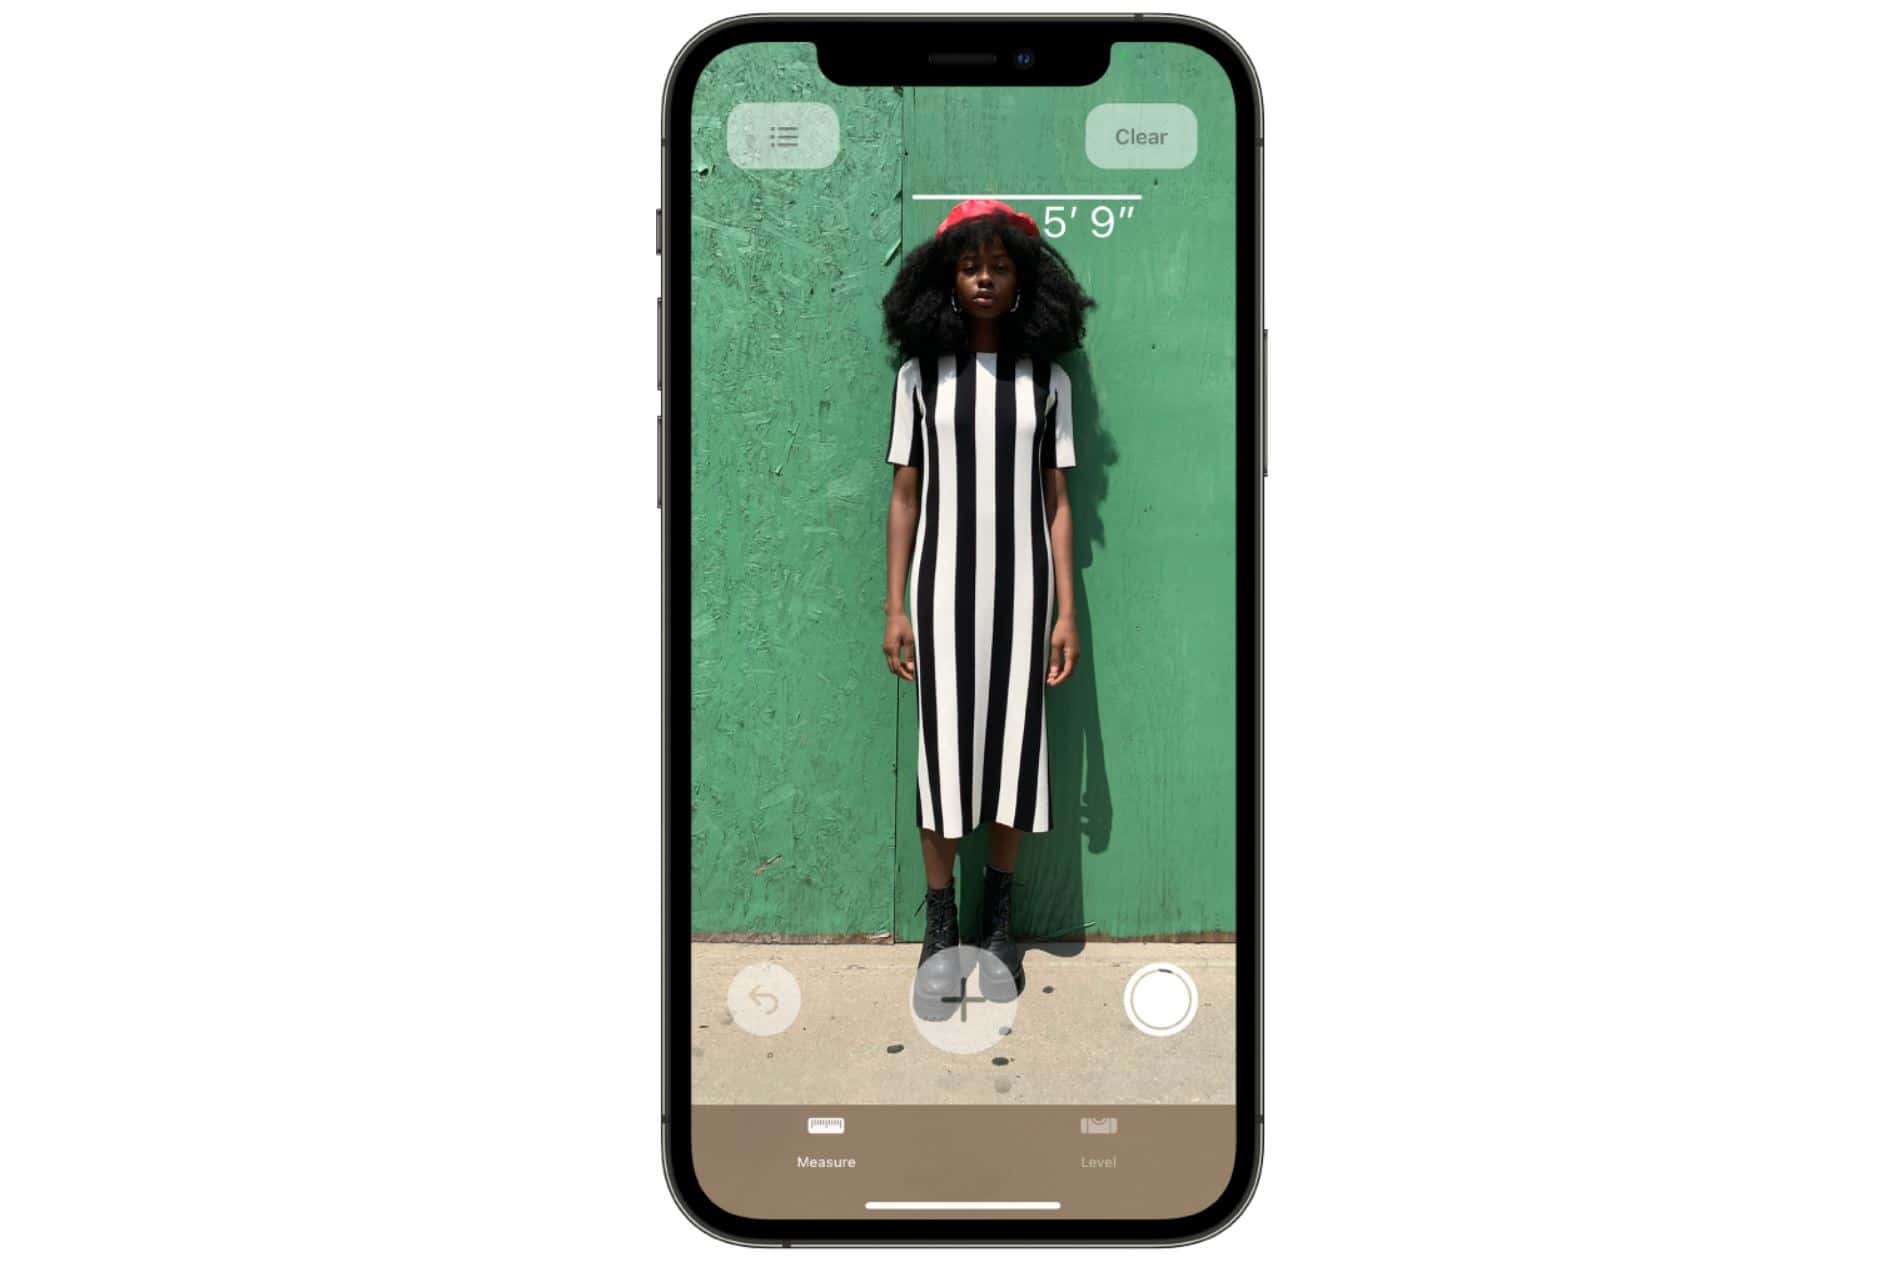 You can measure a person’s height easily on iPhone 12 Pro and iPhone 12 Pro Max